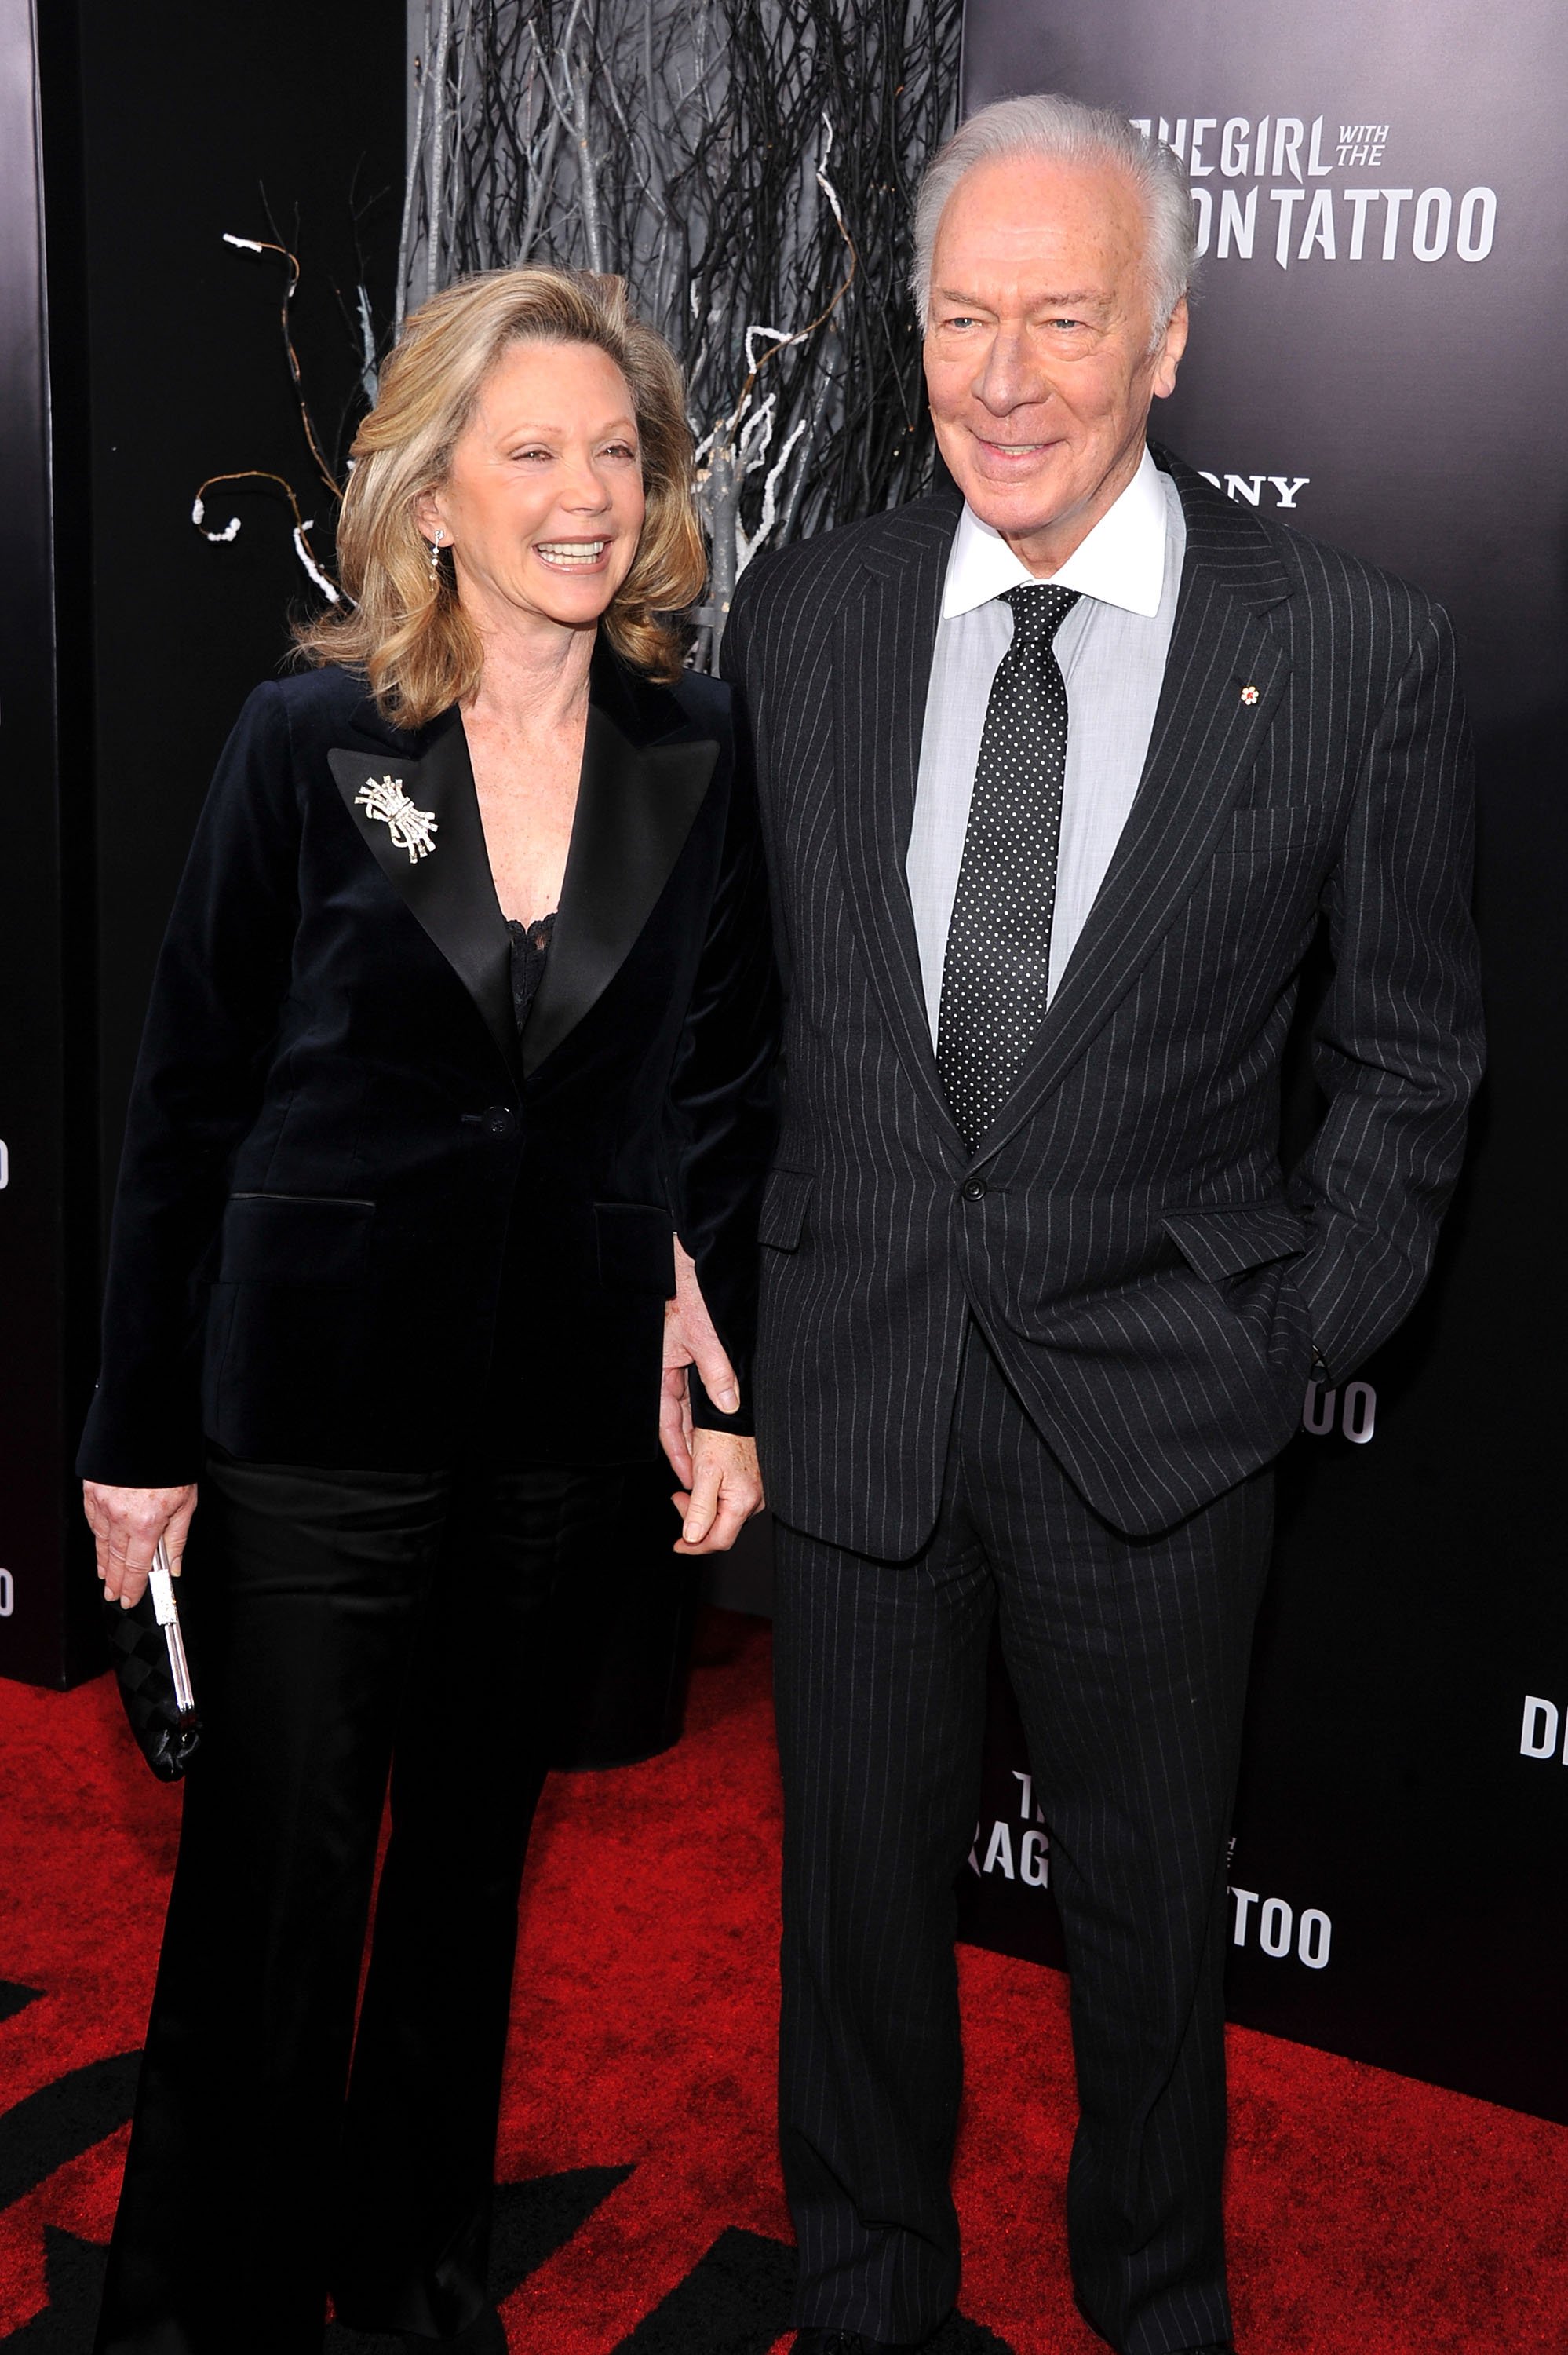  Elaine Taylor and Christopher Plummer pose on the red carpet at "The Girl With the Dragon Tattoo" New York premiere at Ziegfeld Theater on December 14, 2011, in New York City. | Source: Getty Images